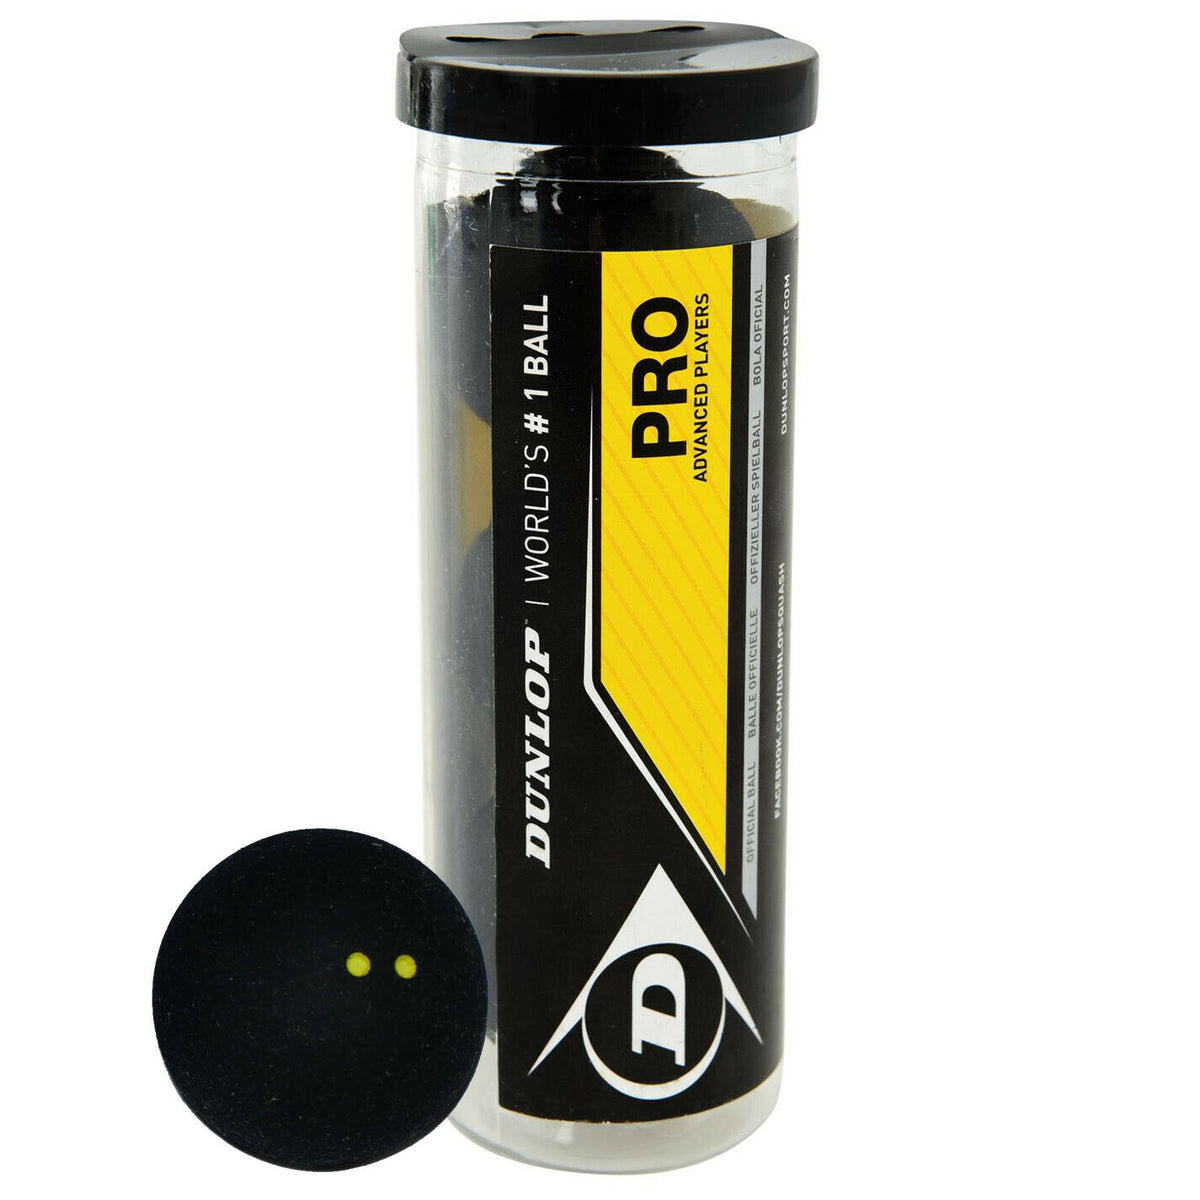 Dunlop Pro Squash Balls 3 Ball in Tube for Advanced Players Official Ball of WSF PSA WSA - Hamtons Direct